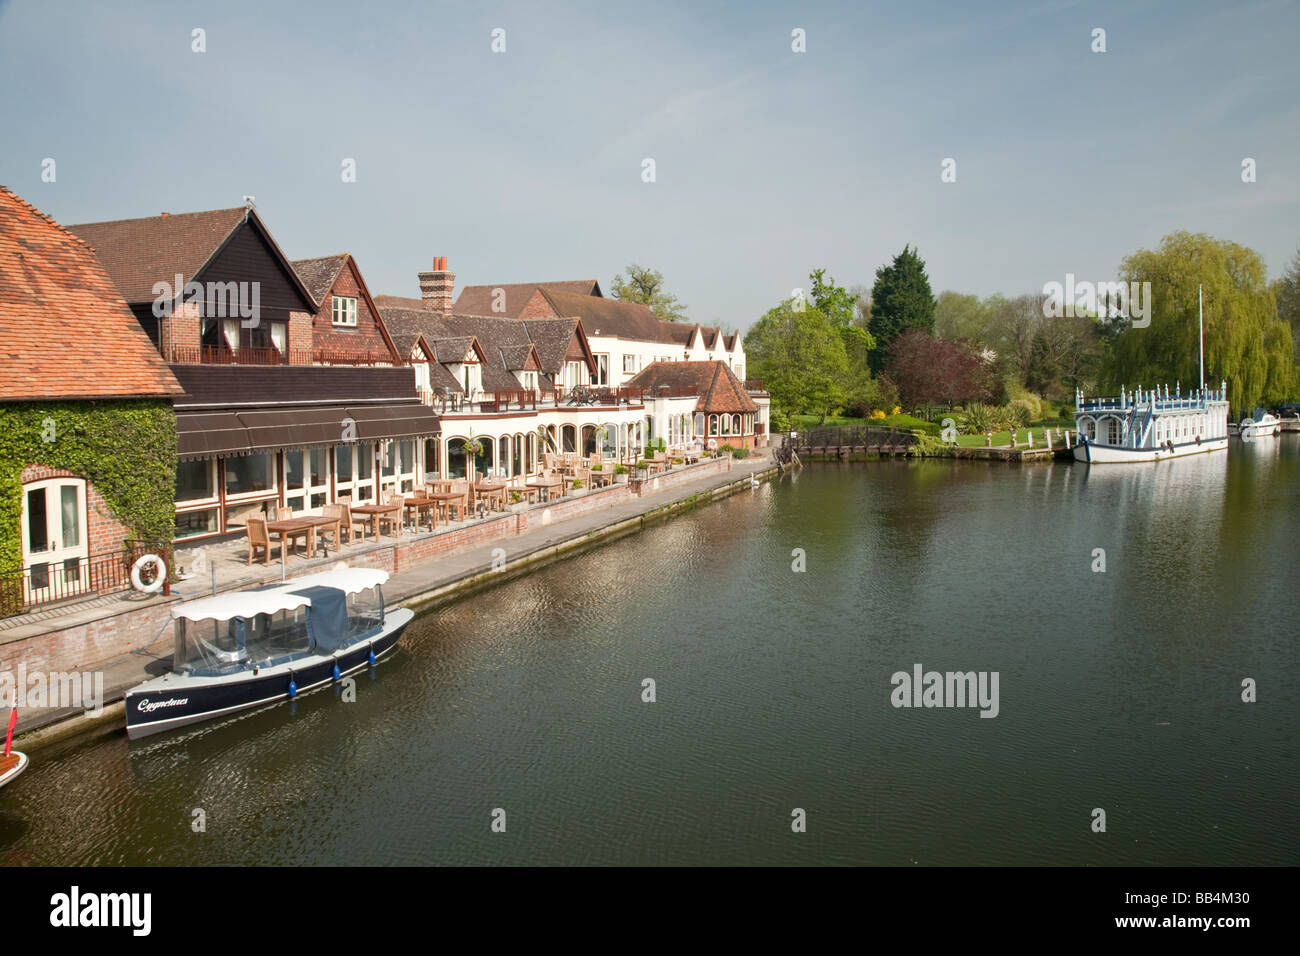 The Swan restaurant at Streatley on the banks of the River Thames in Oxfordshire Uk Stock Photo